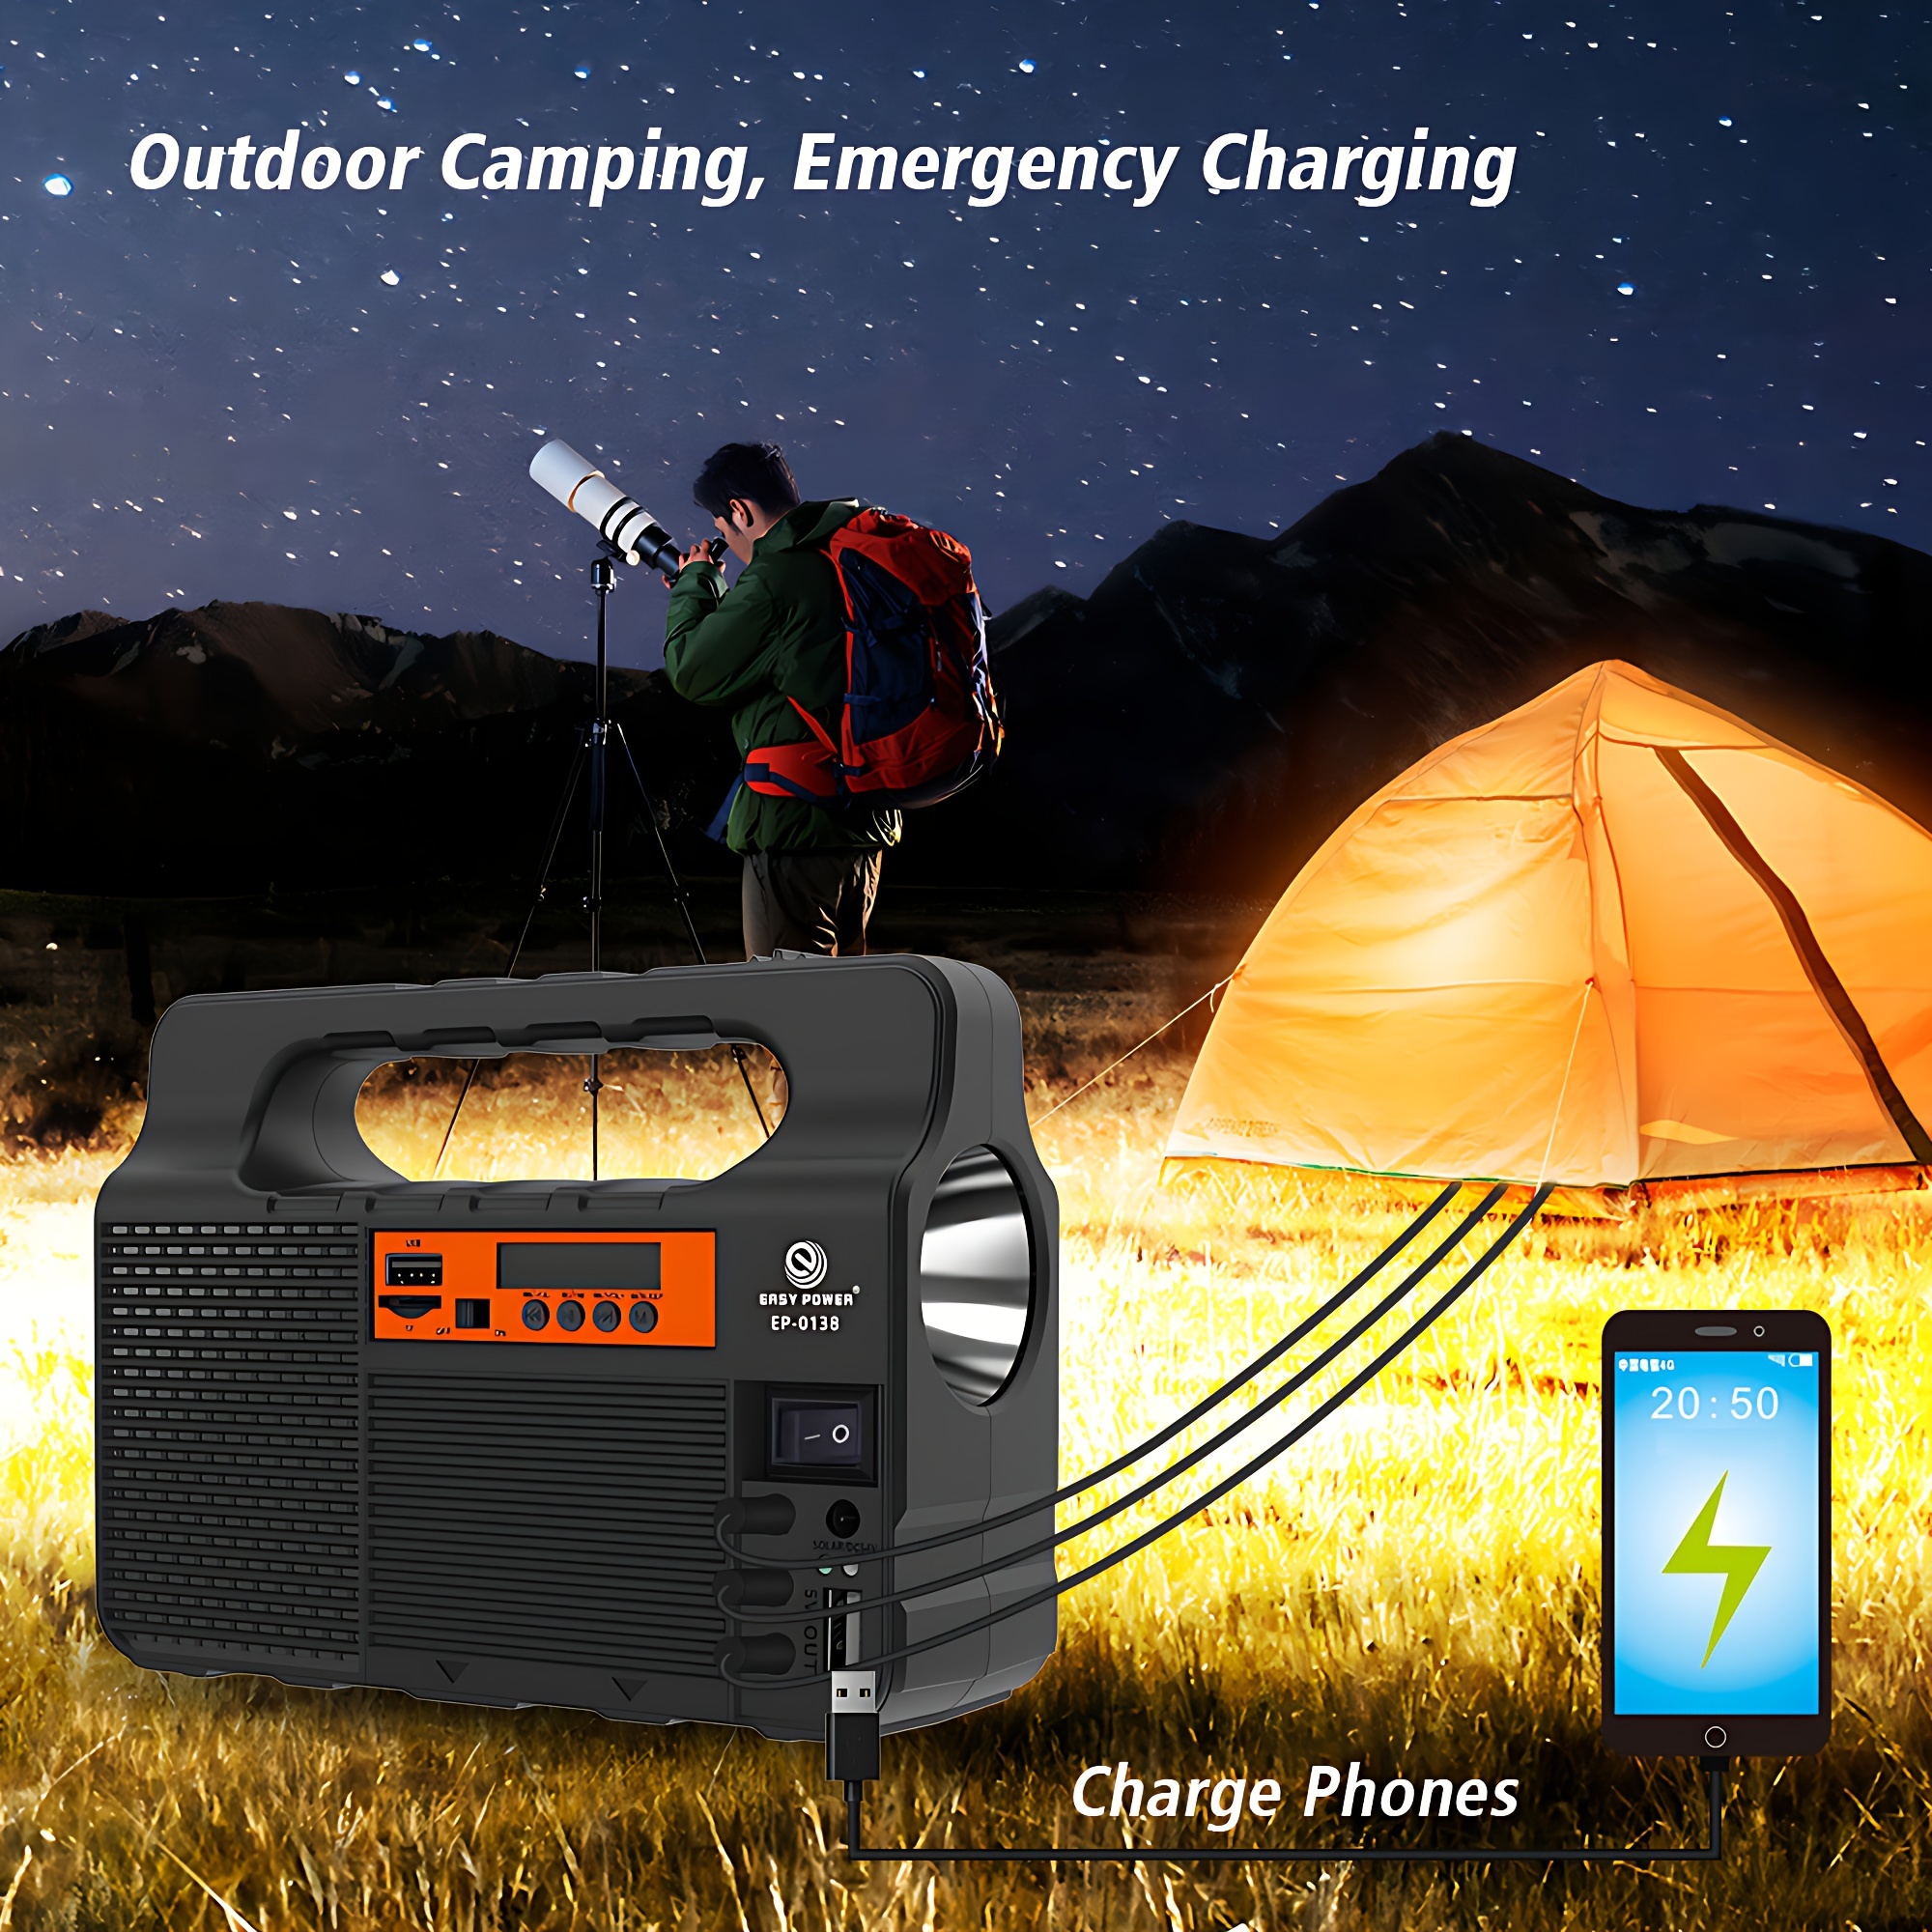 Solar Powered Camping Lights: Can Solar Generator Power Camping